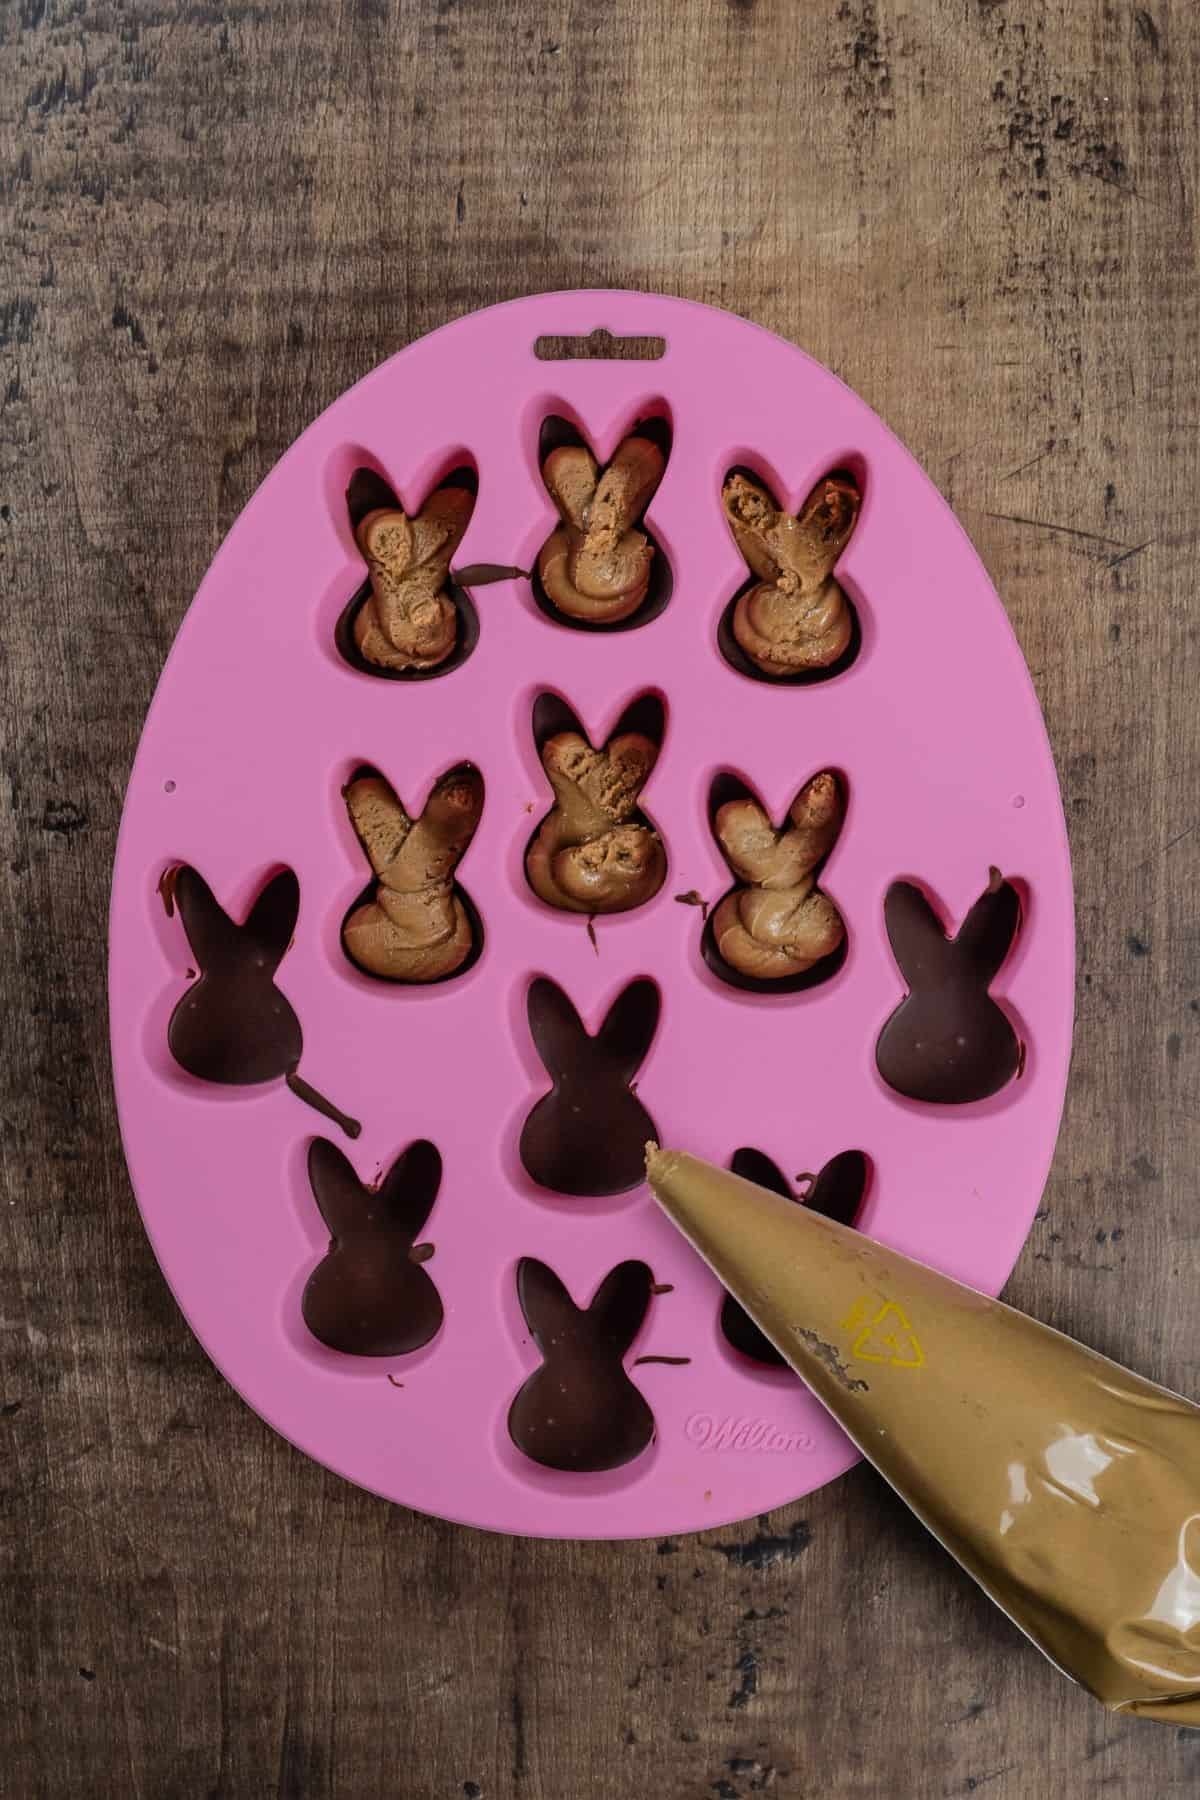 A pink bunny candy mold on a wood tabletop is being filled with sunbutter filling. A piping bag is next to the mold and is filled with the filling.